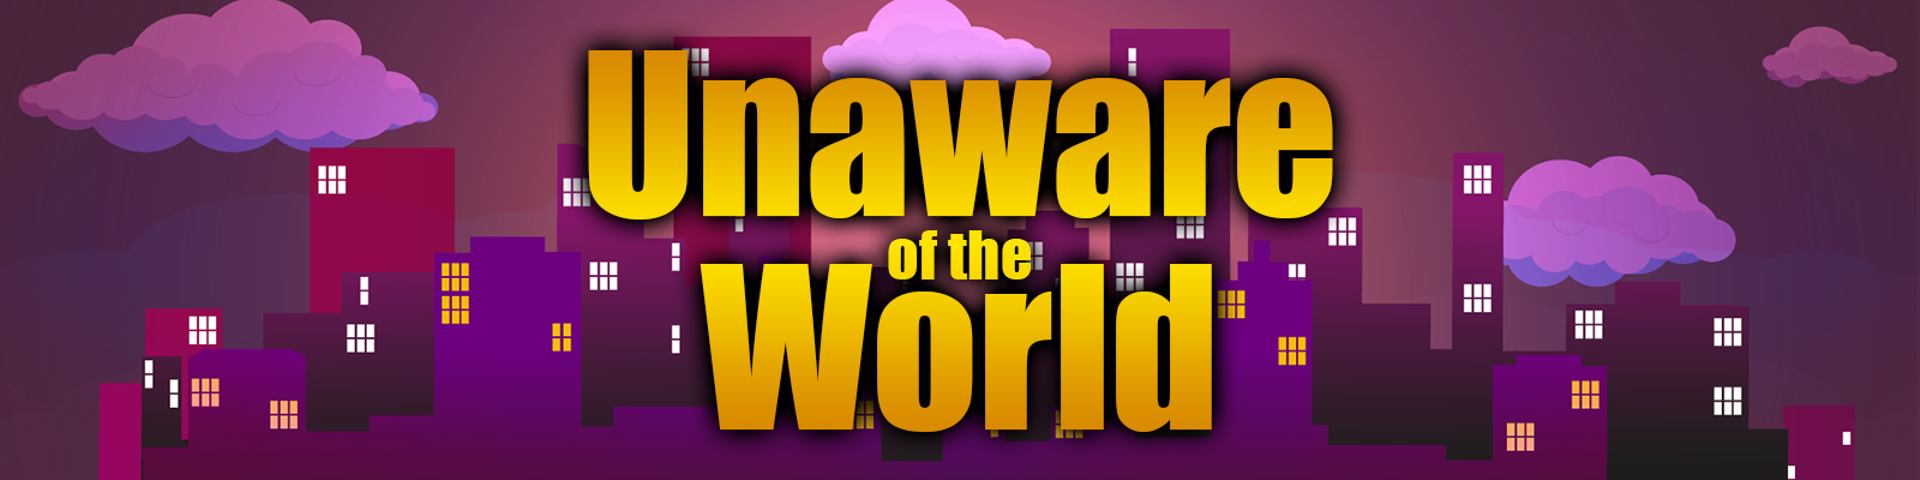 Unaware Of The World - Version 0.15a by Unaware Team Win32/Win64/Mac/Linux/Android